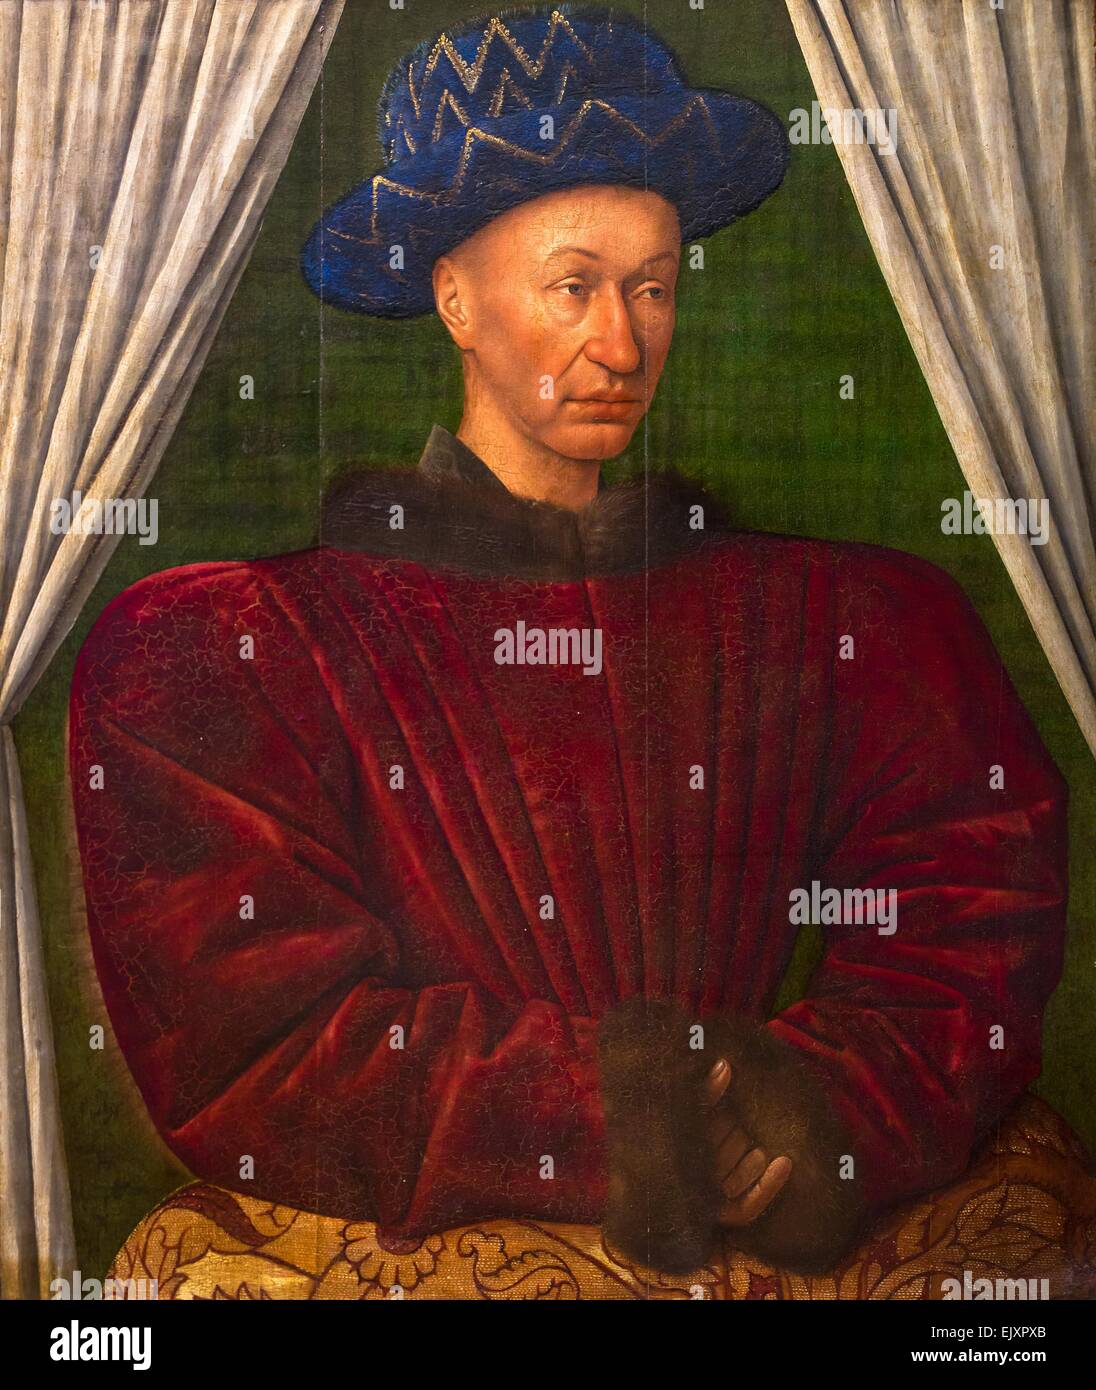 ActiveMuseum 0001965.jpg / Charles VII, King of France, ca 1445 - Jean Fouquet 26/09/2013  -   / Middle Ages Collection / Active Museum Stock Photo